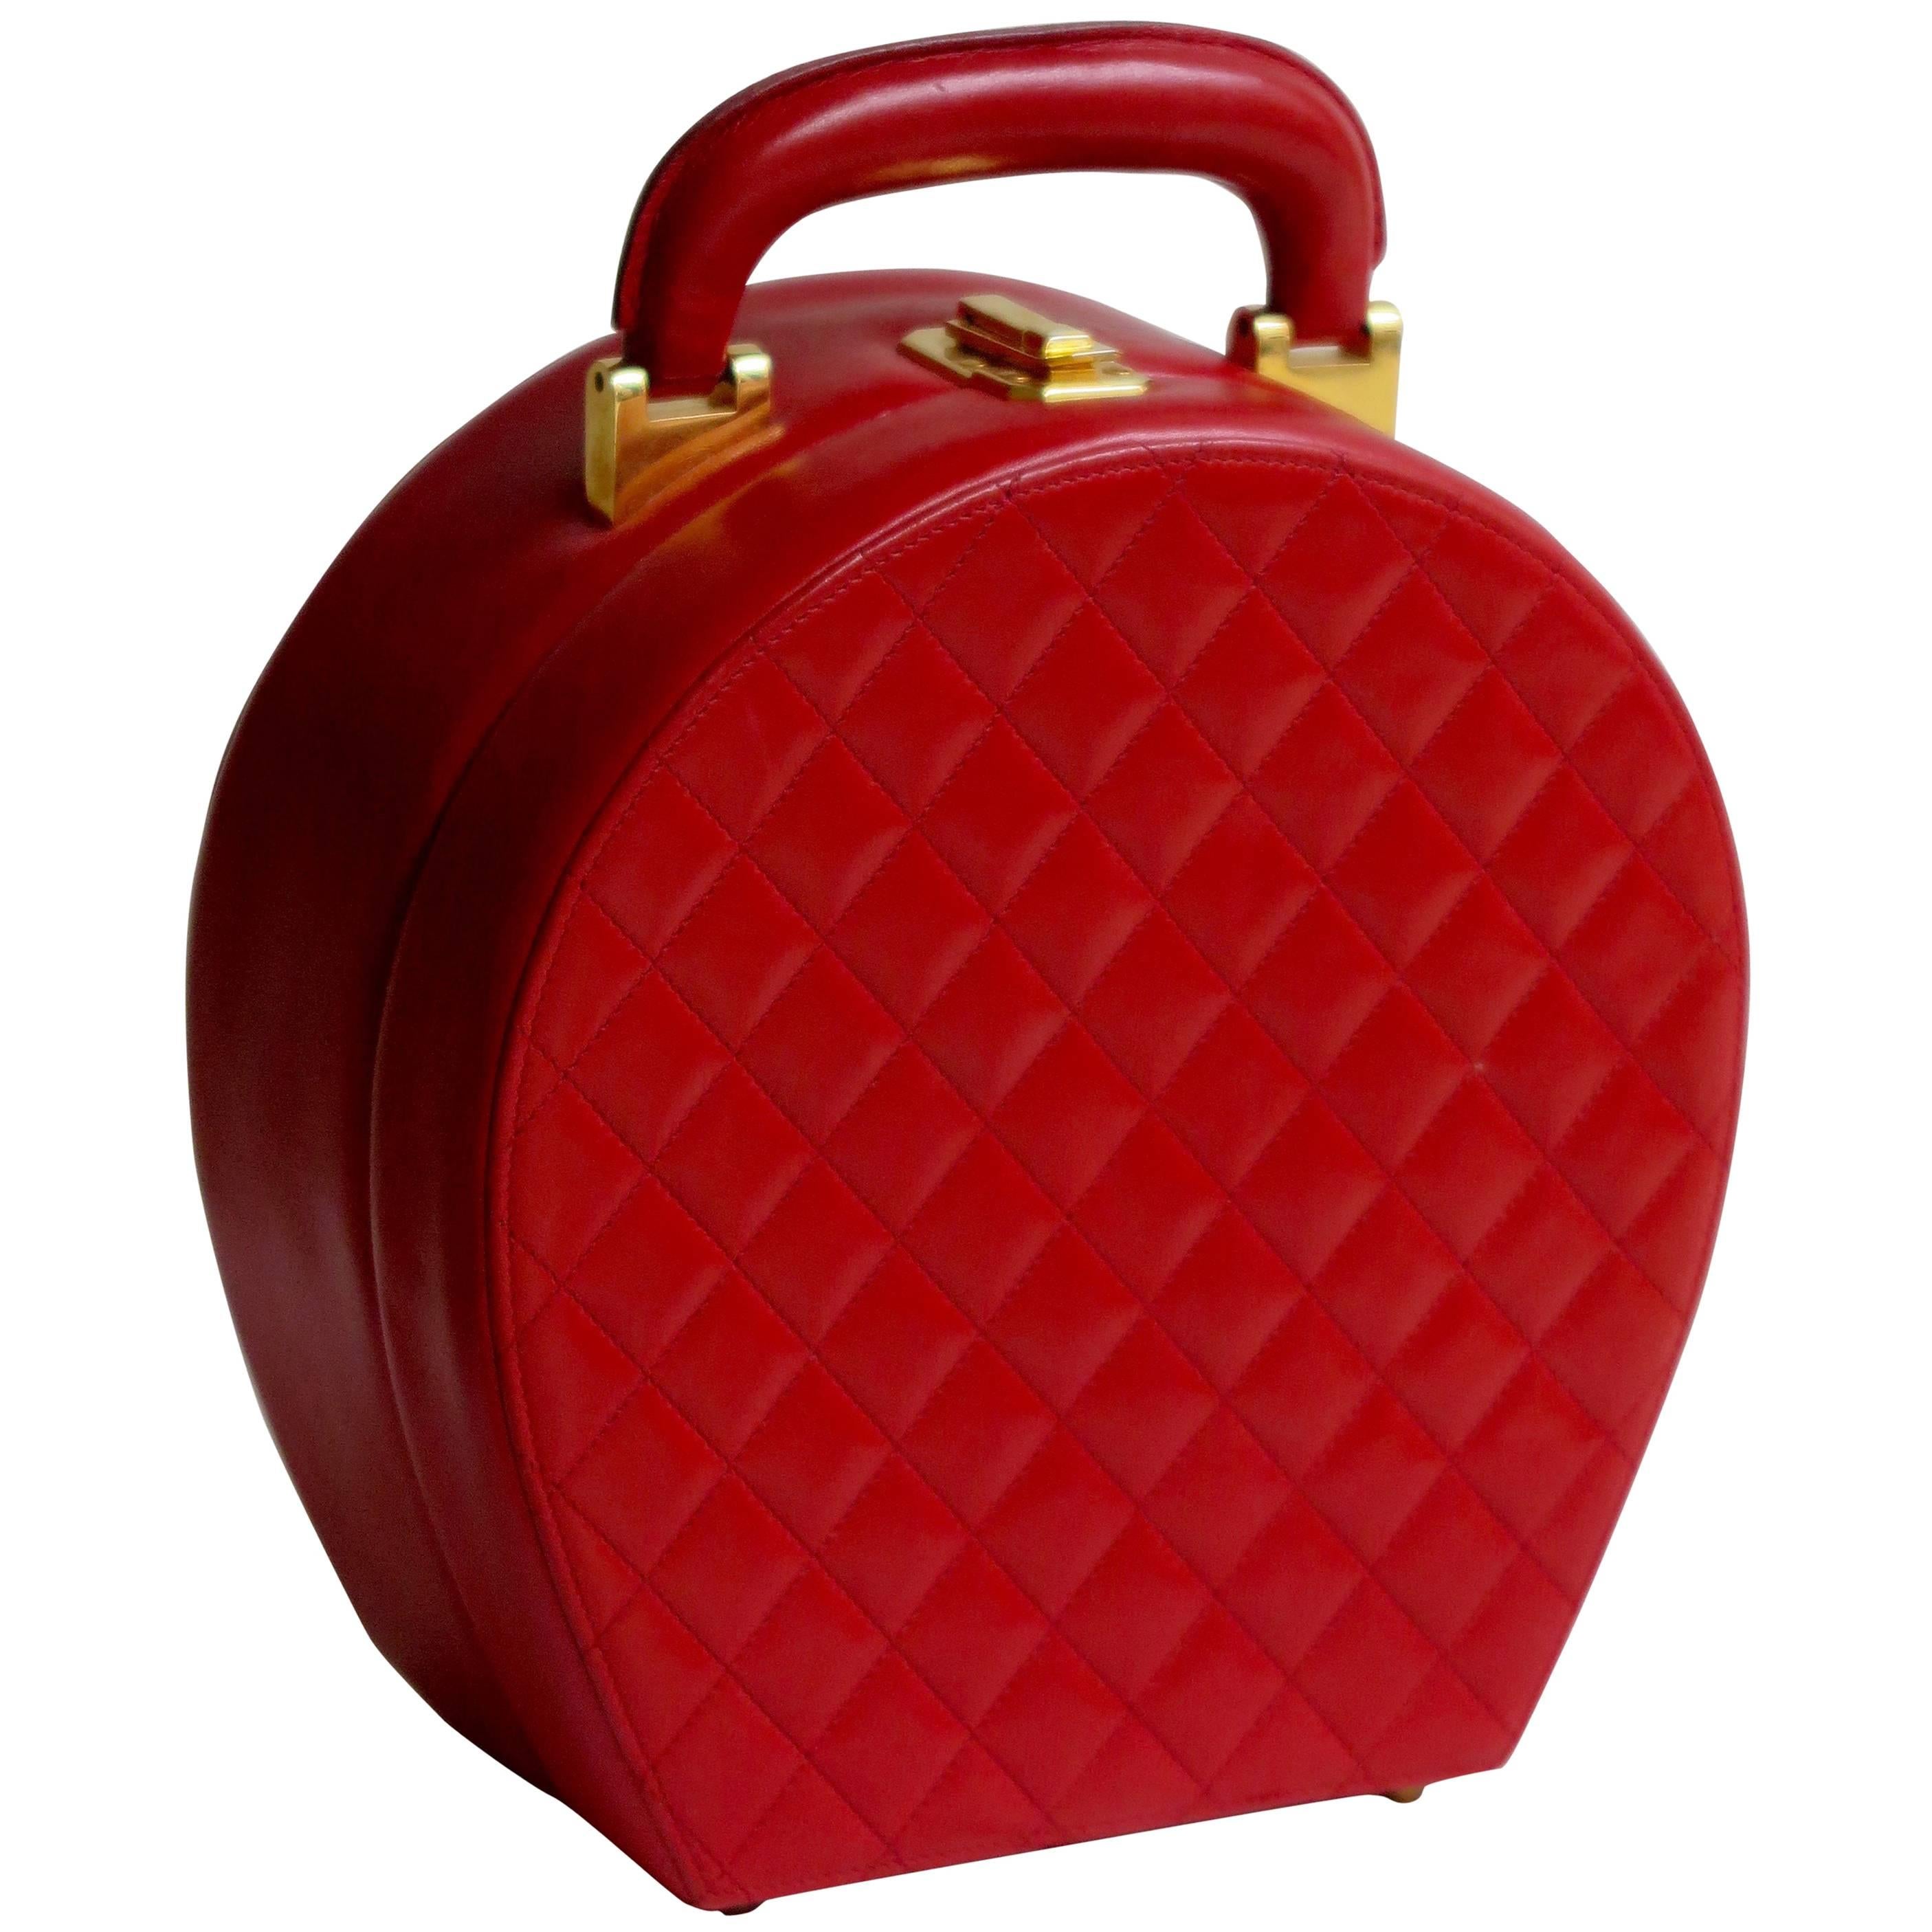 Chanel " Lipstick Red " Vanity or Bag